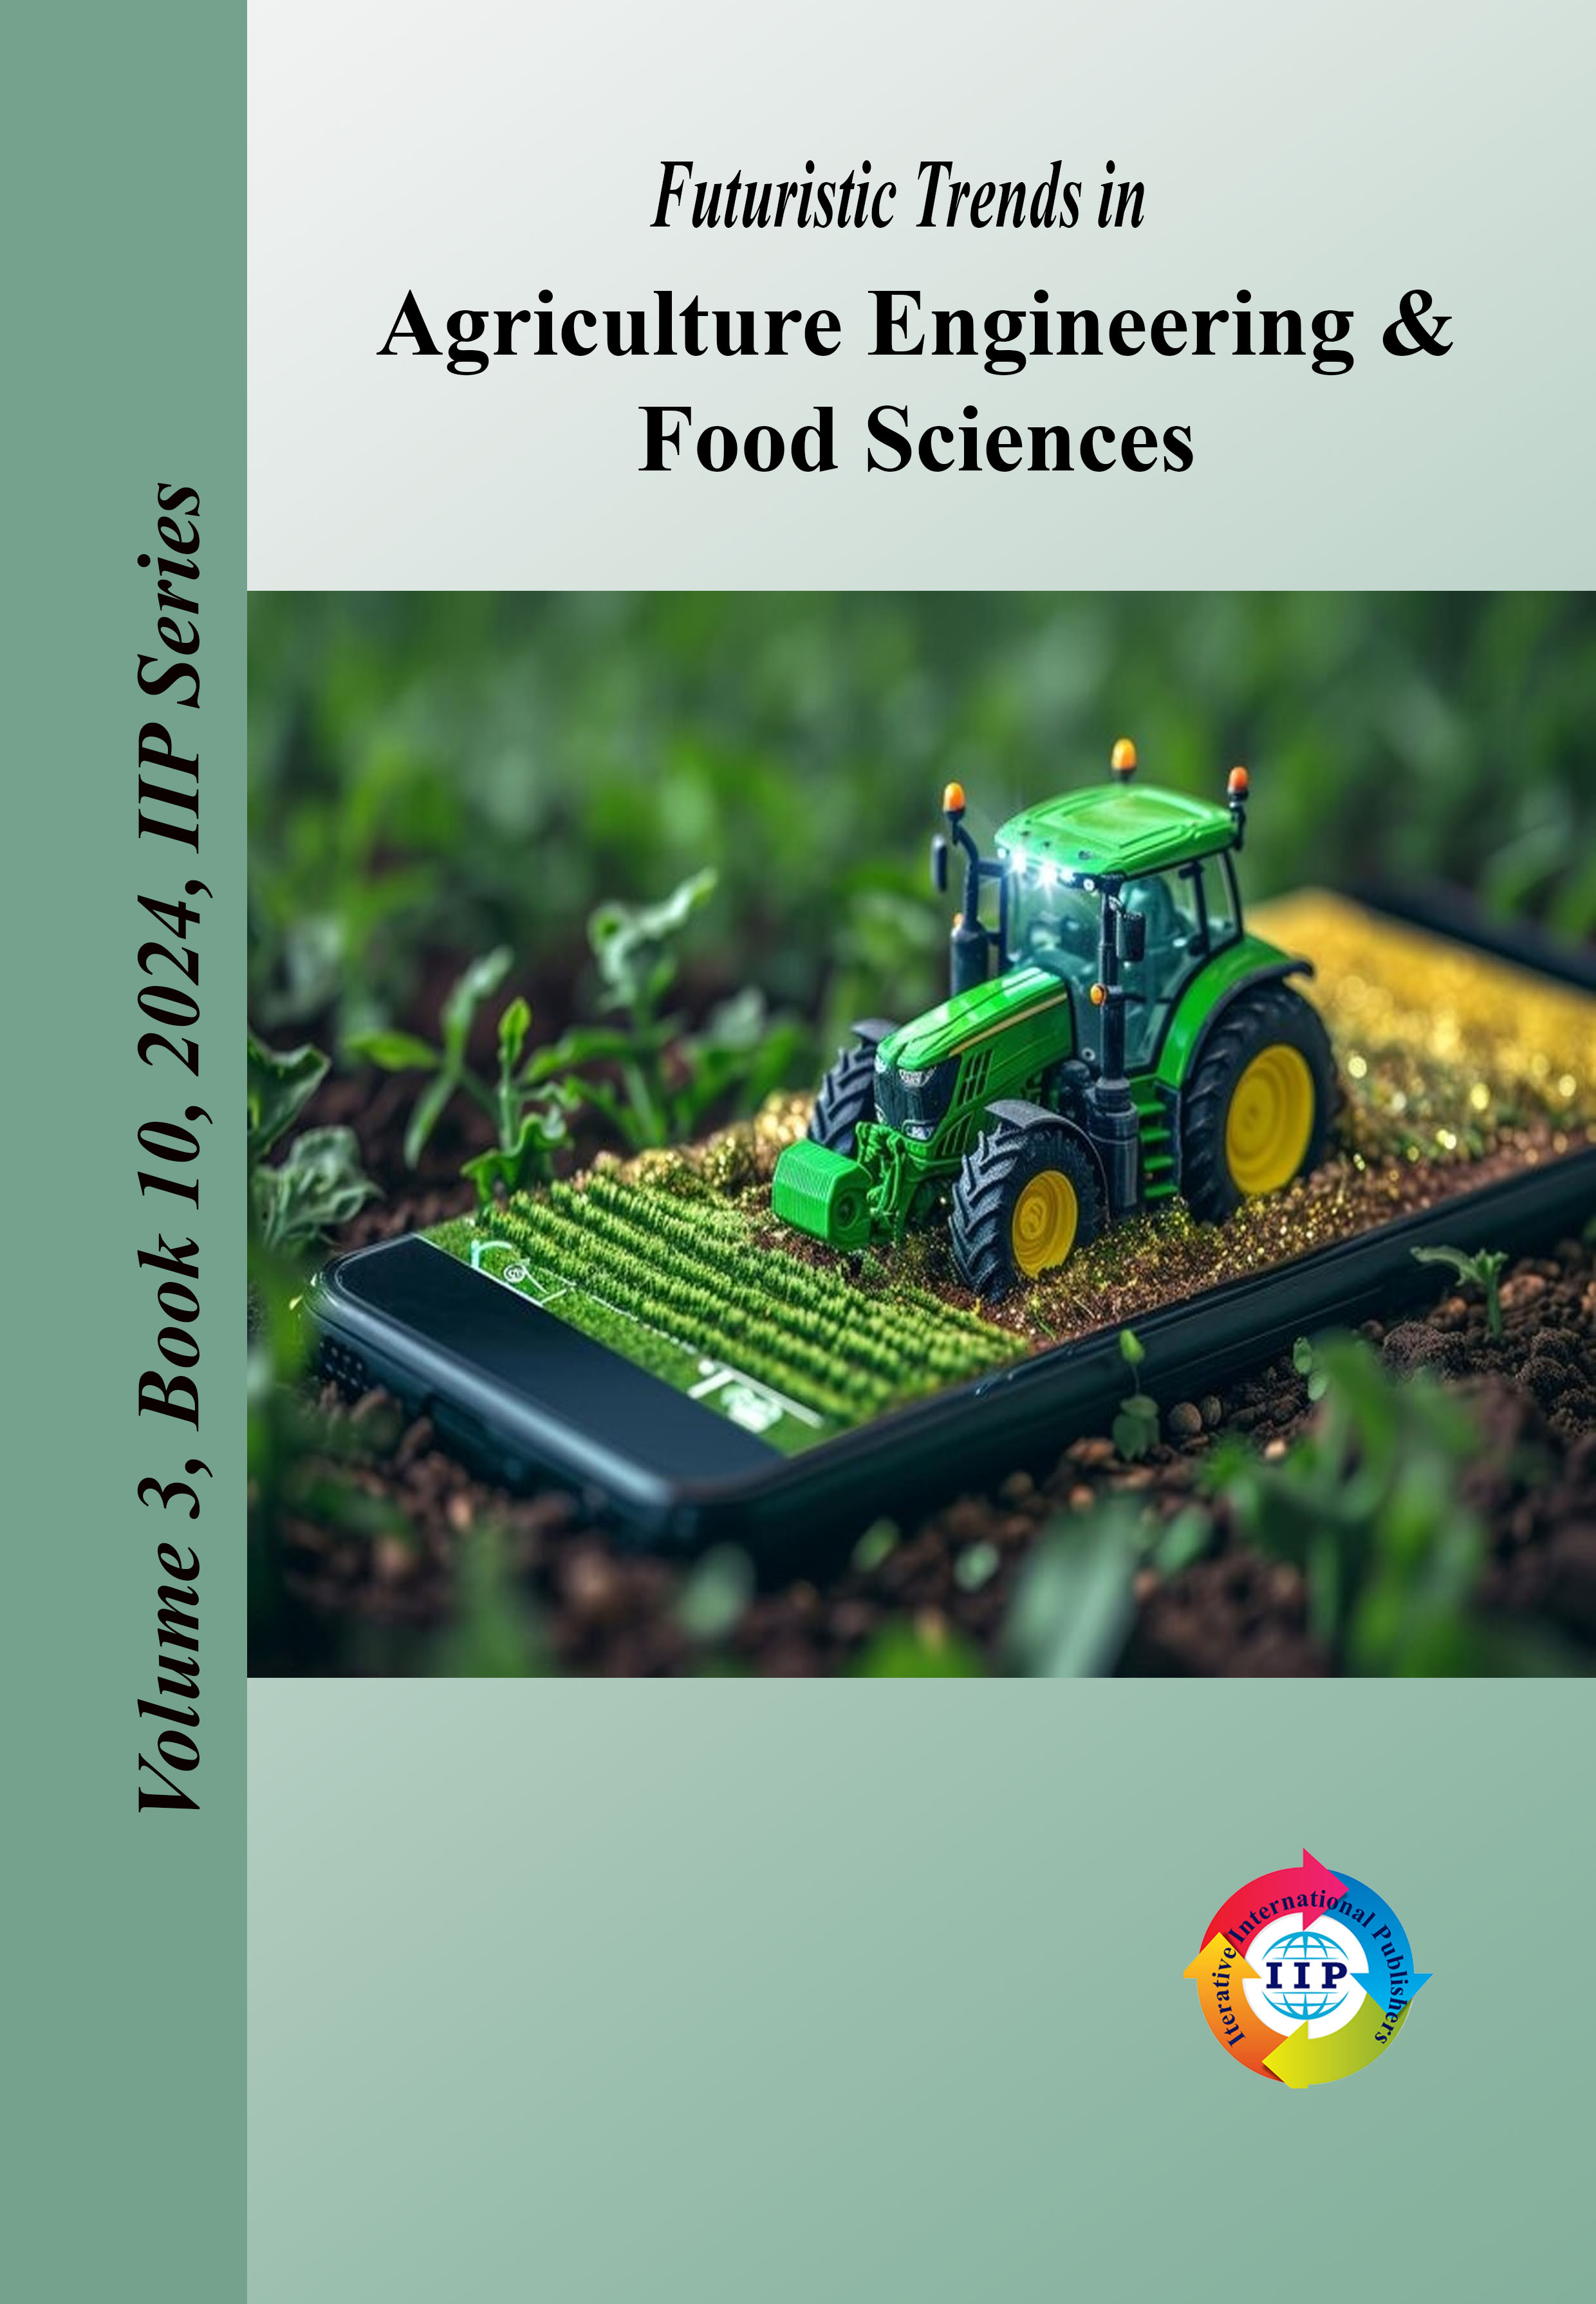 Futuristic Trends in Agriculture Engineering & Food Sciences Volume 3 Book 10